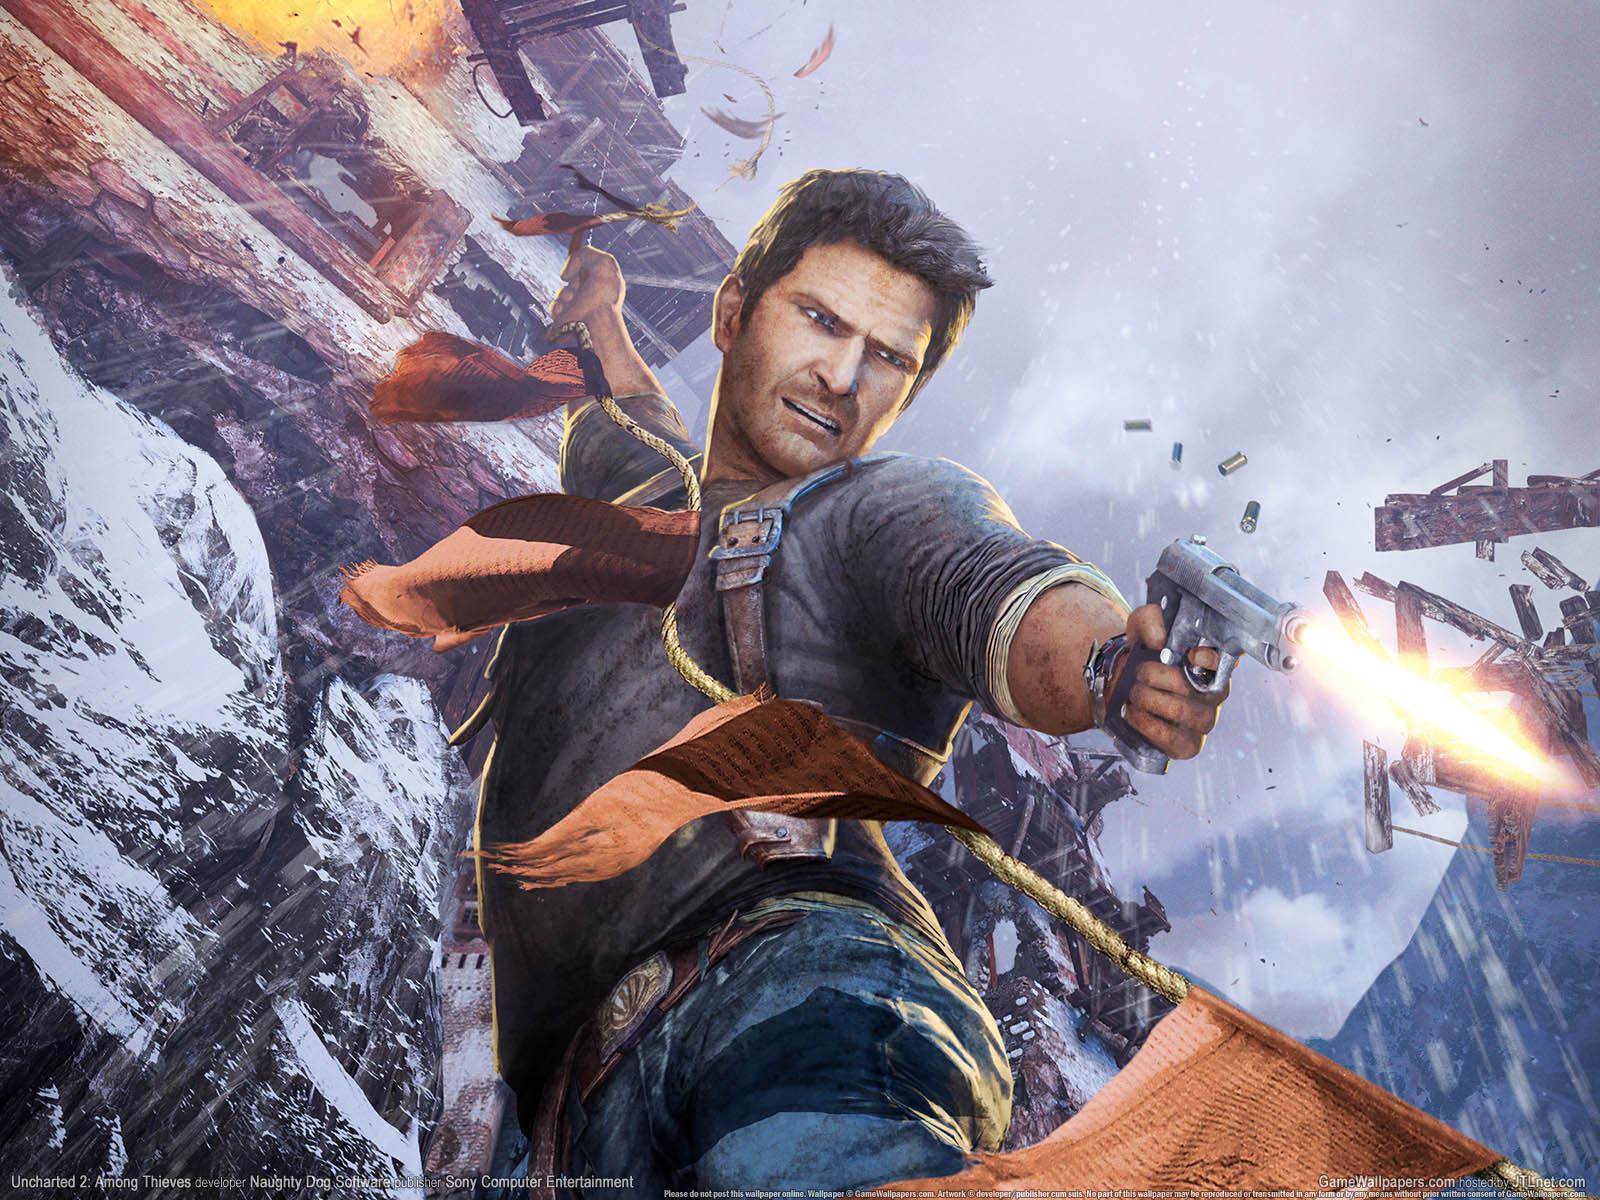 Uncharted 2: Among Thieves wallpaper 04 1600x1200